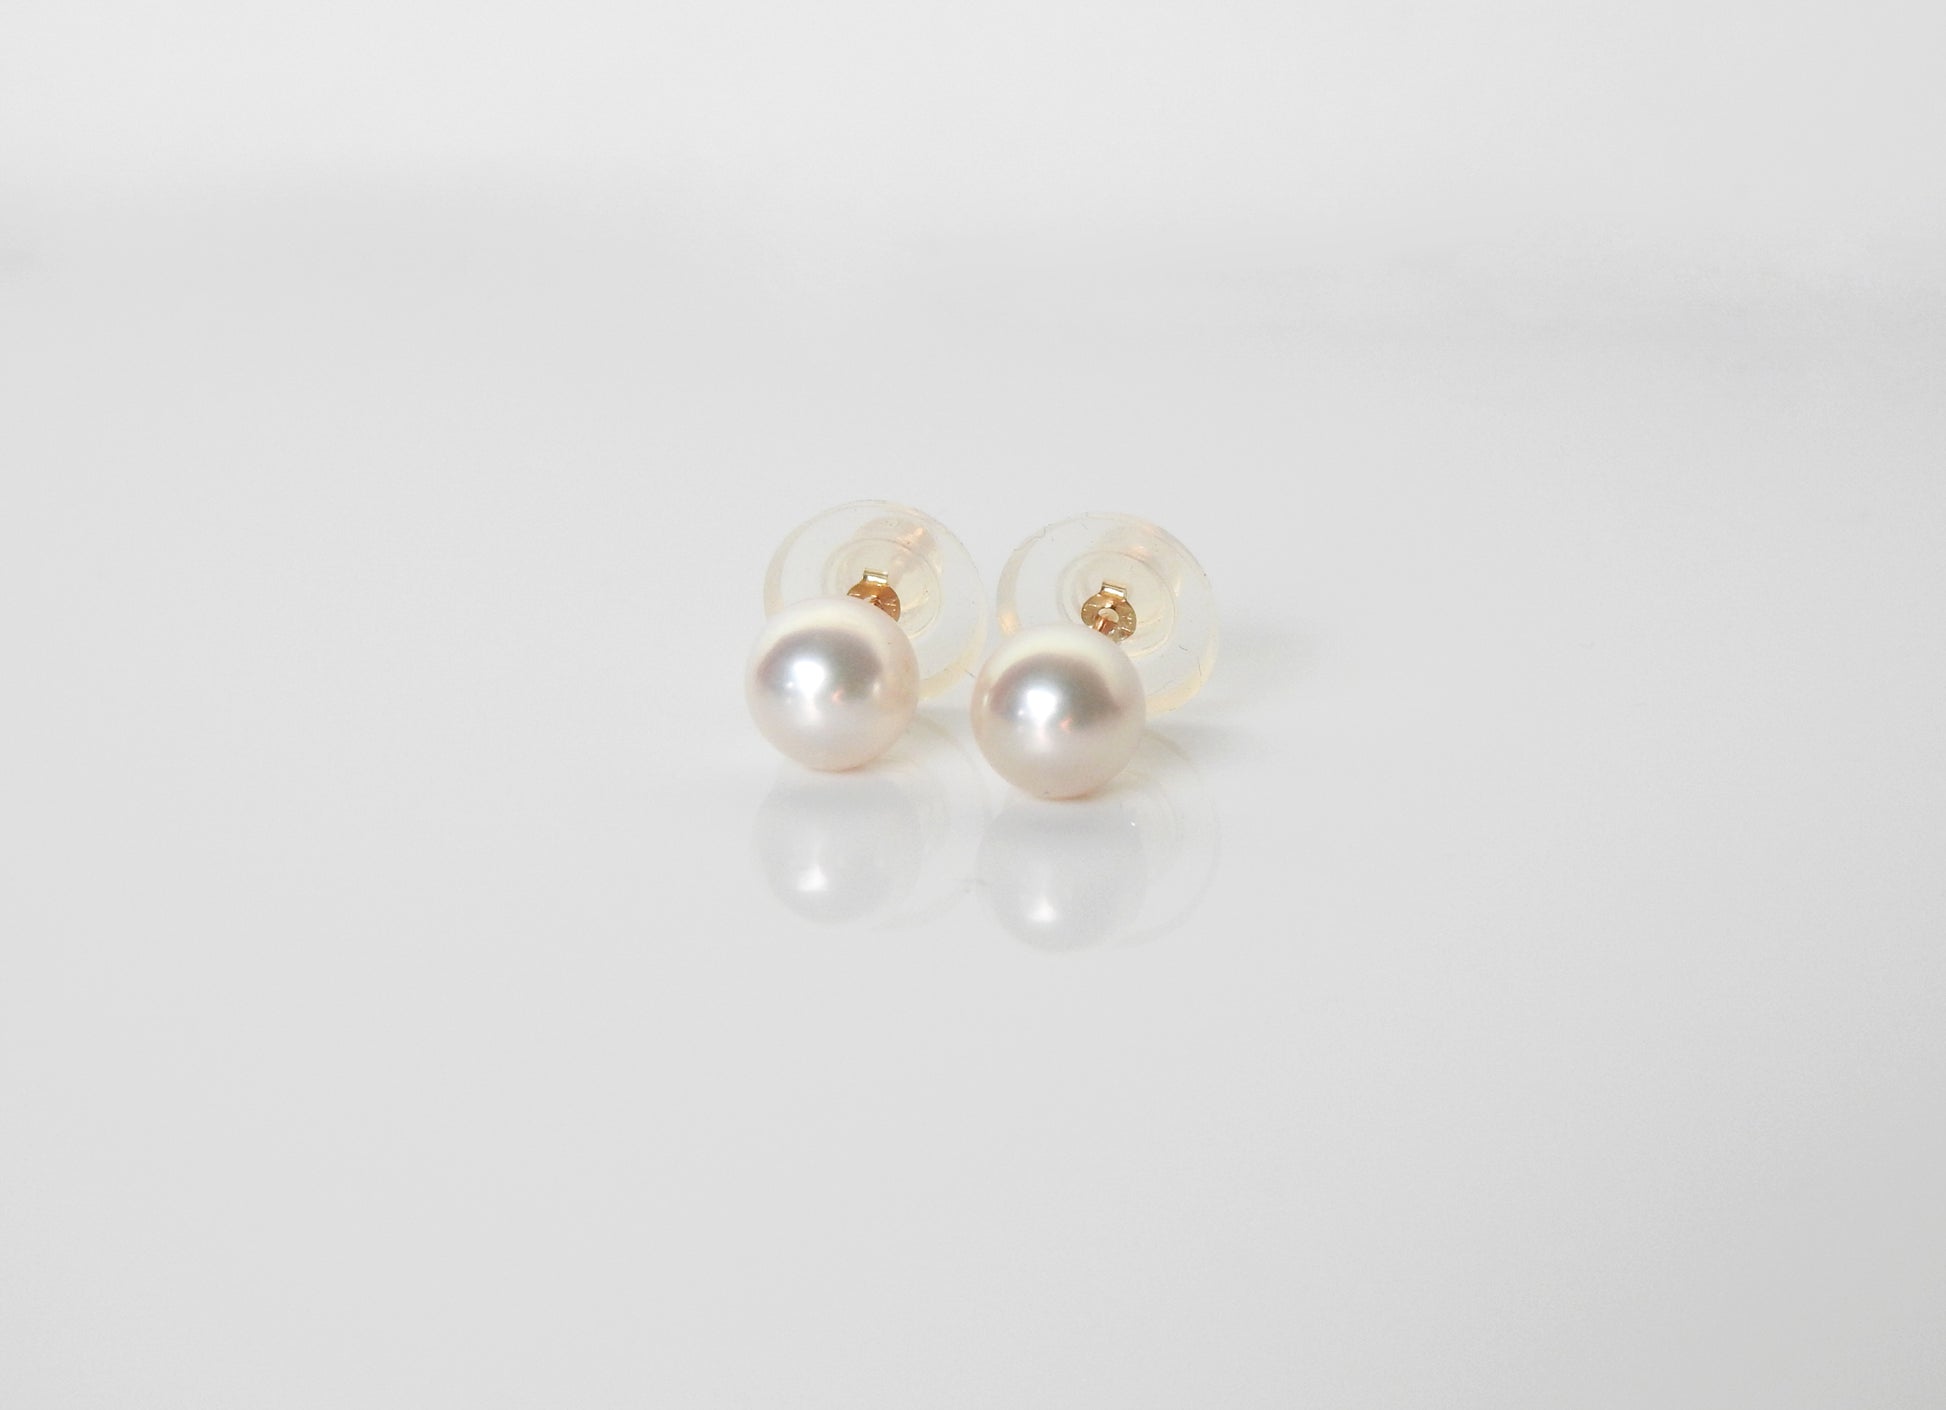 Simple classic and stunning akoya pearl studs with 14kt yellow gold cup post and 8.7mm disc silicone grip friction backs, by ZEALmetal, Nicole Horlor, in Kingston, ON Canada